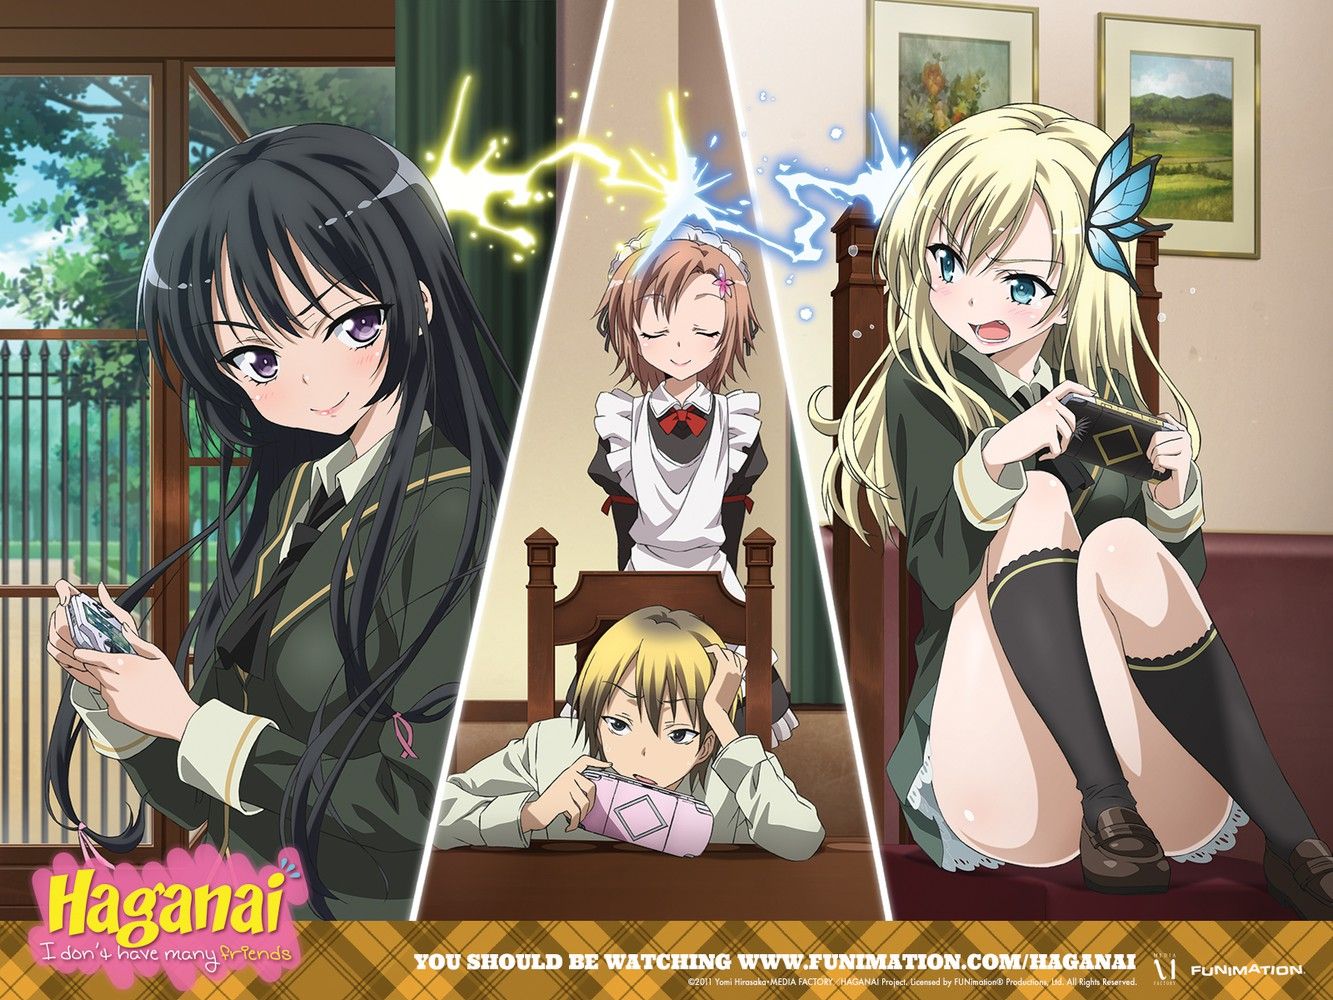 "Haganai" of meat together images to admire the Kashiwazaki Sena's dirty little schoolgirl body part2 2